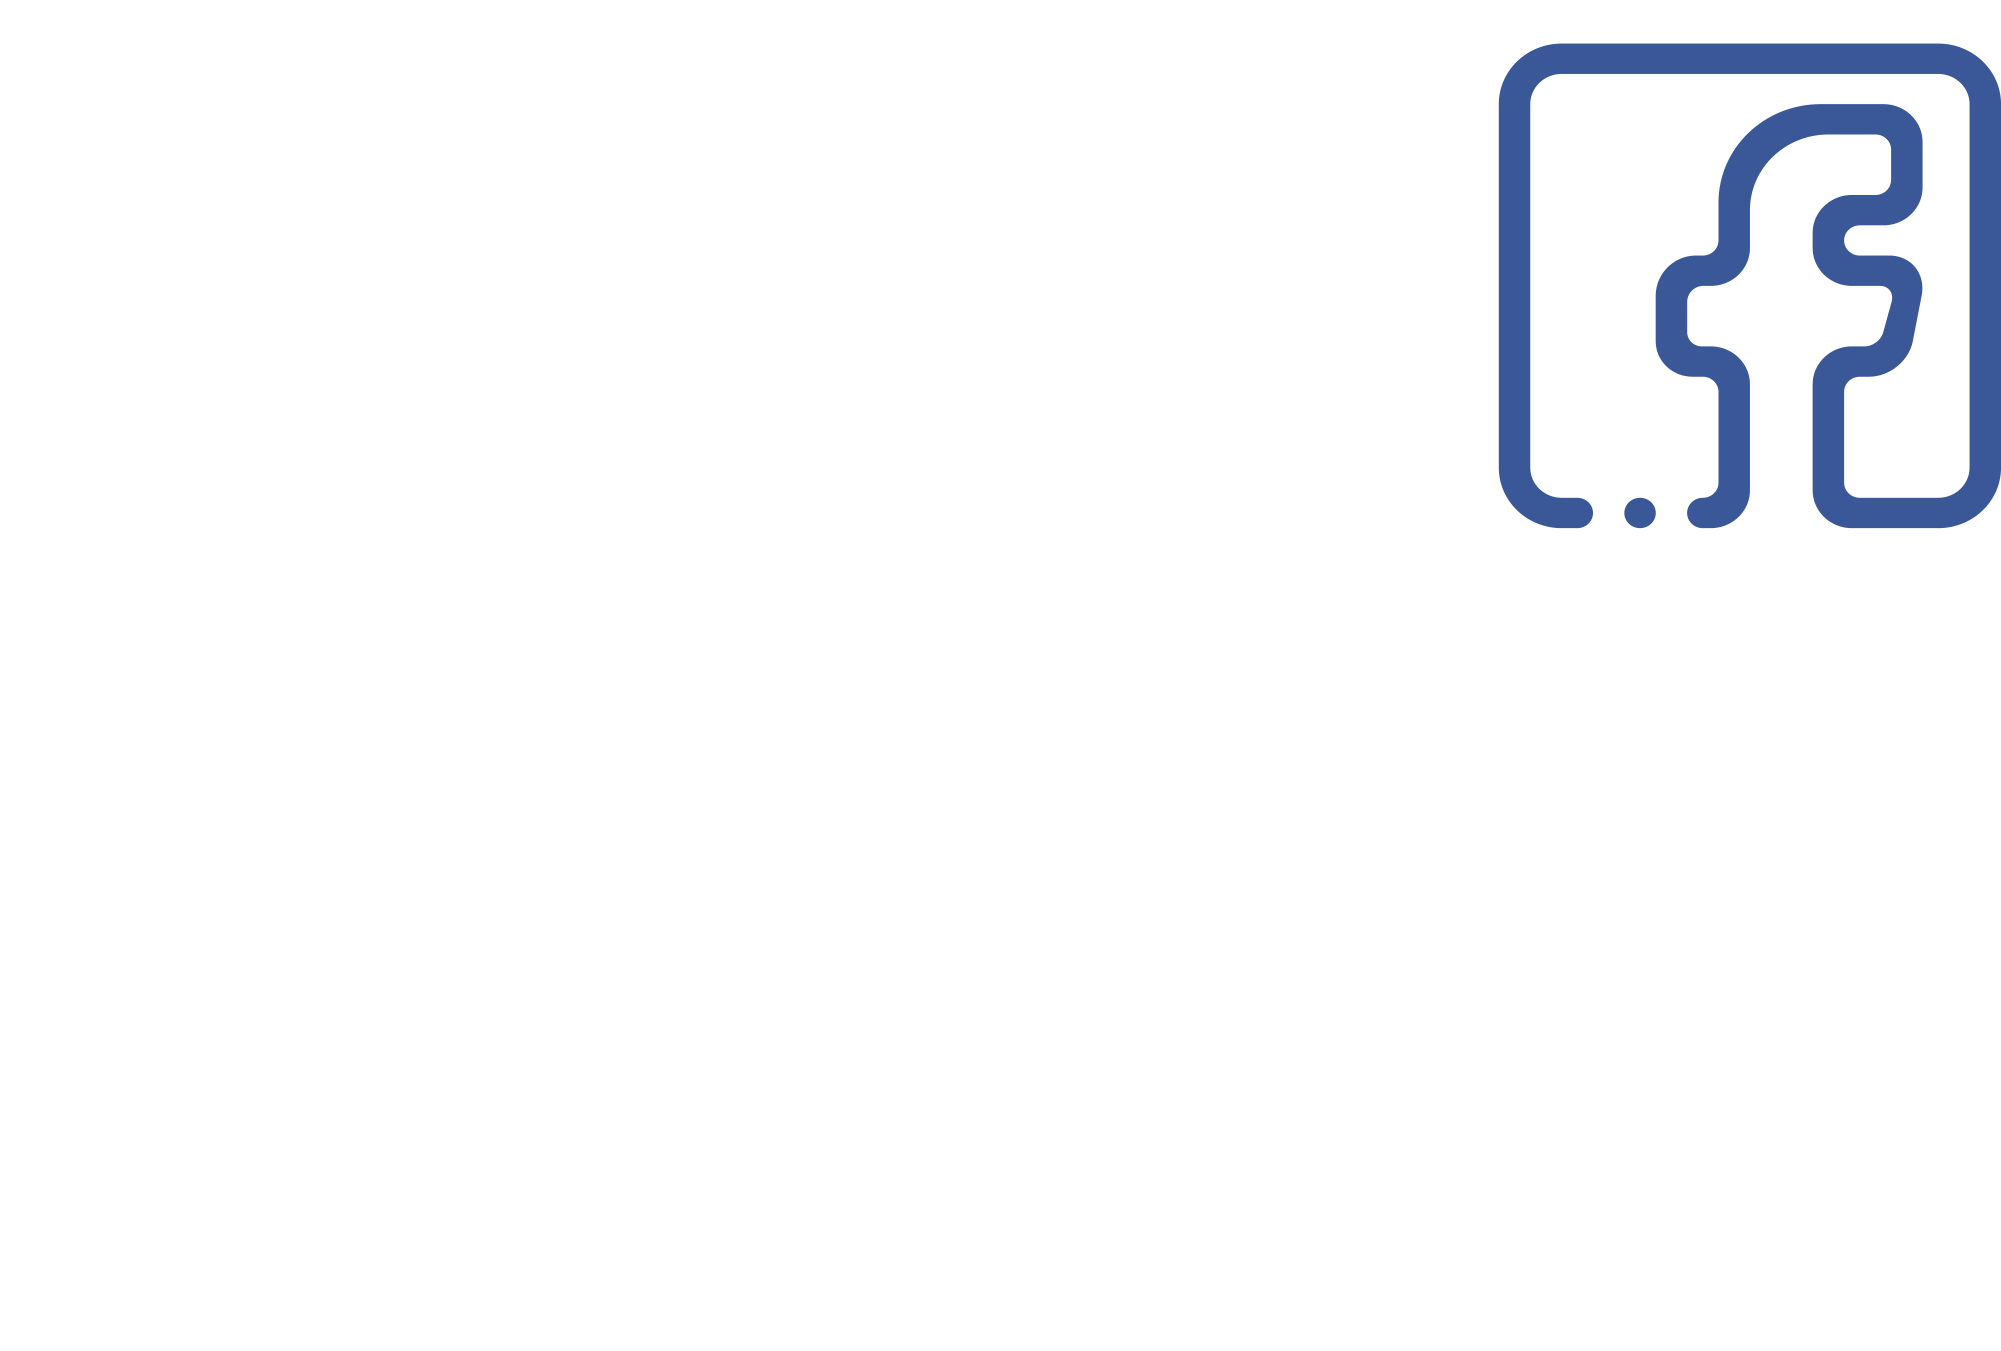 Join our Facebook Group & be a part of the HST Community! typography